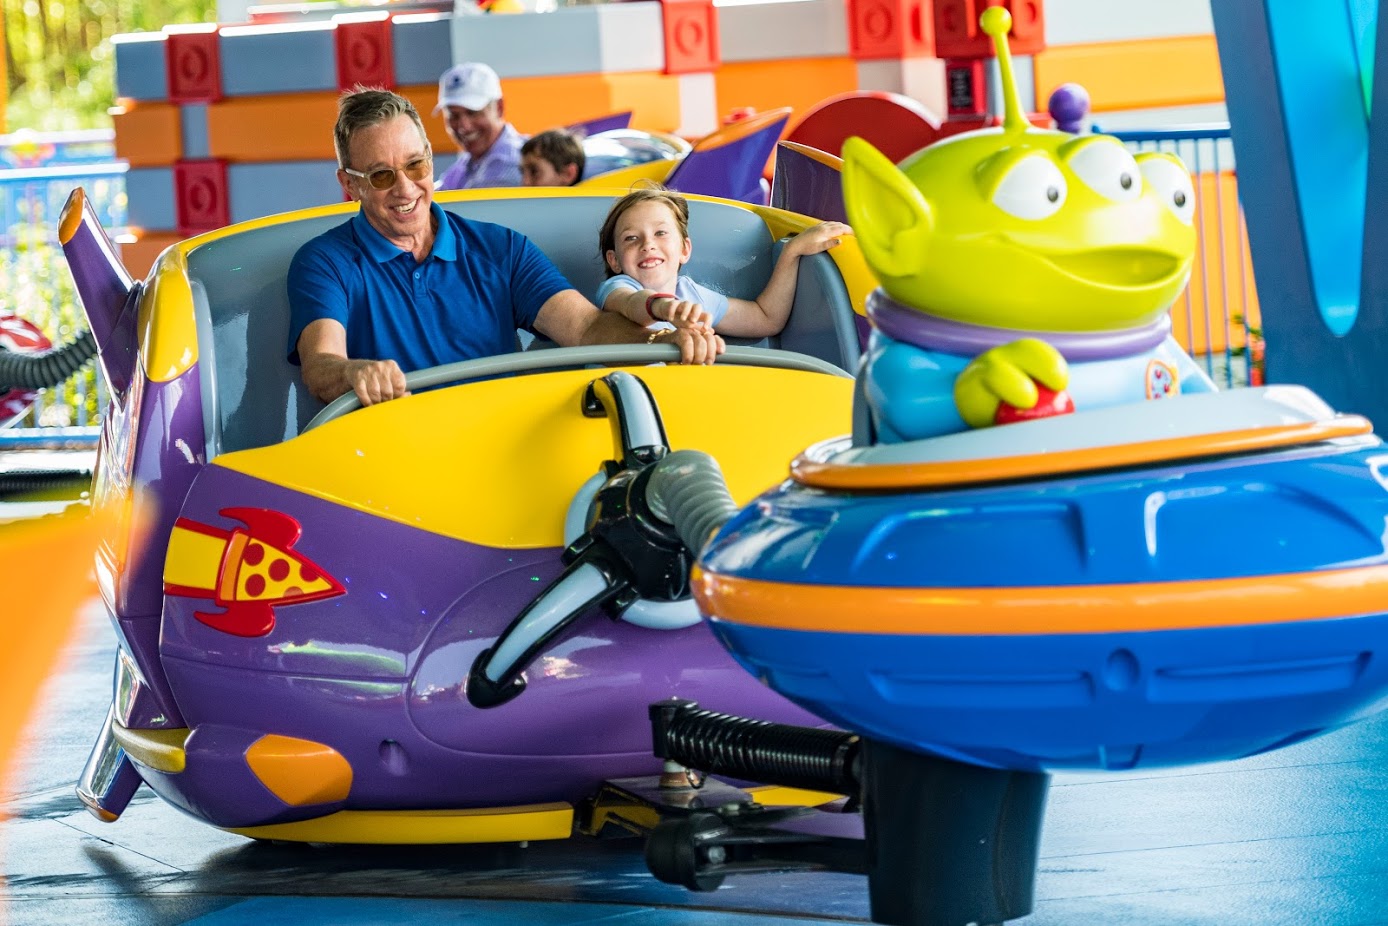 Tim Allen and Other Celebrities Visit Toy Story Land